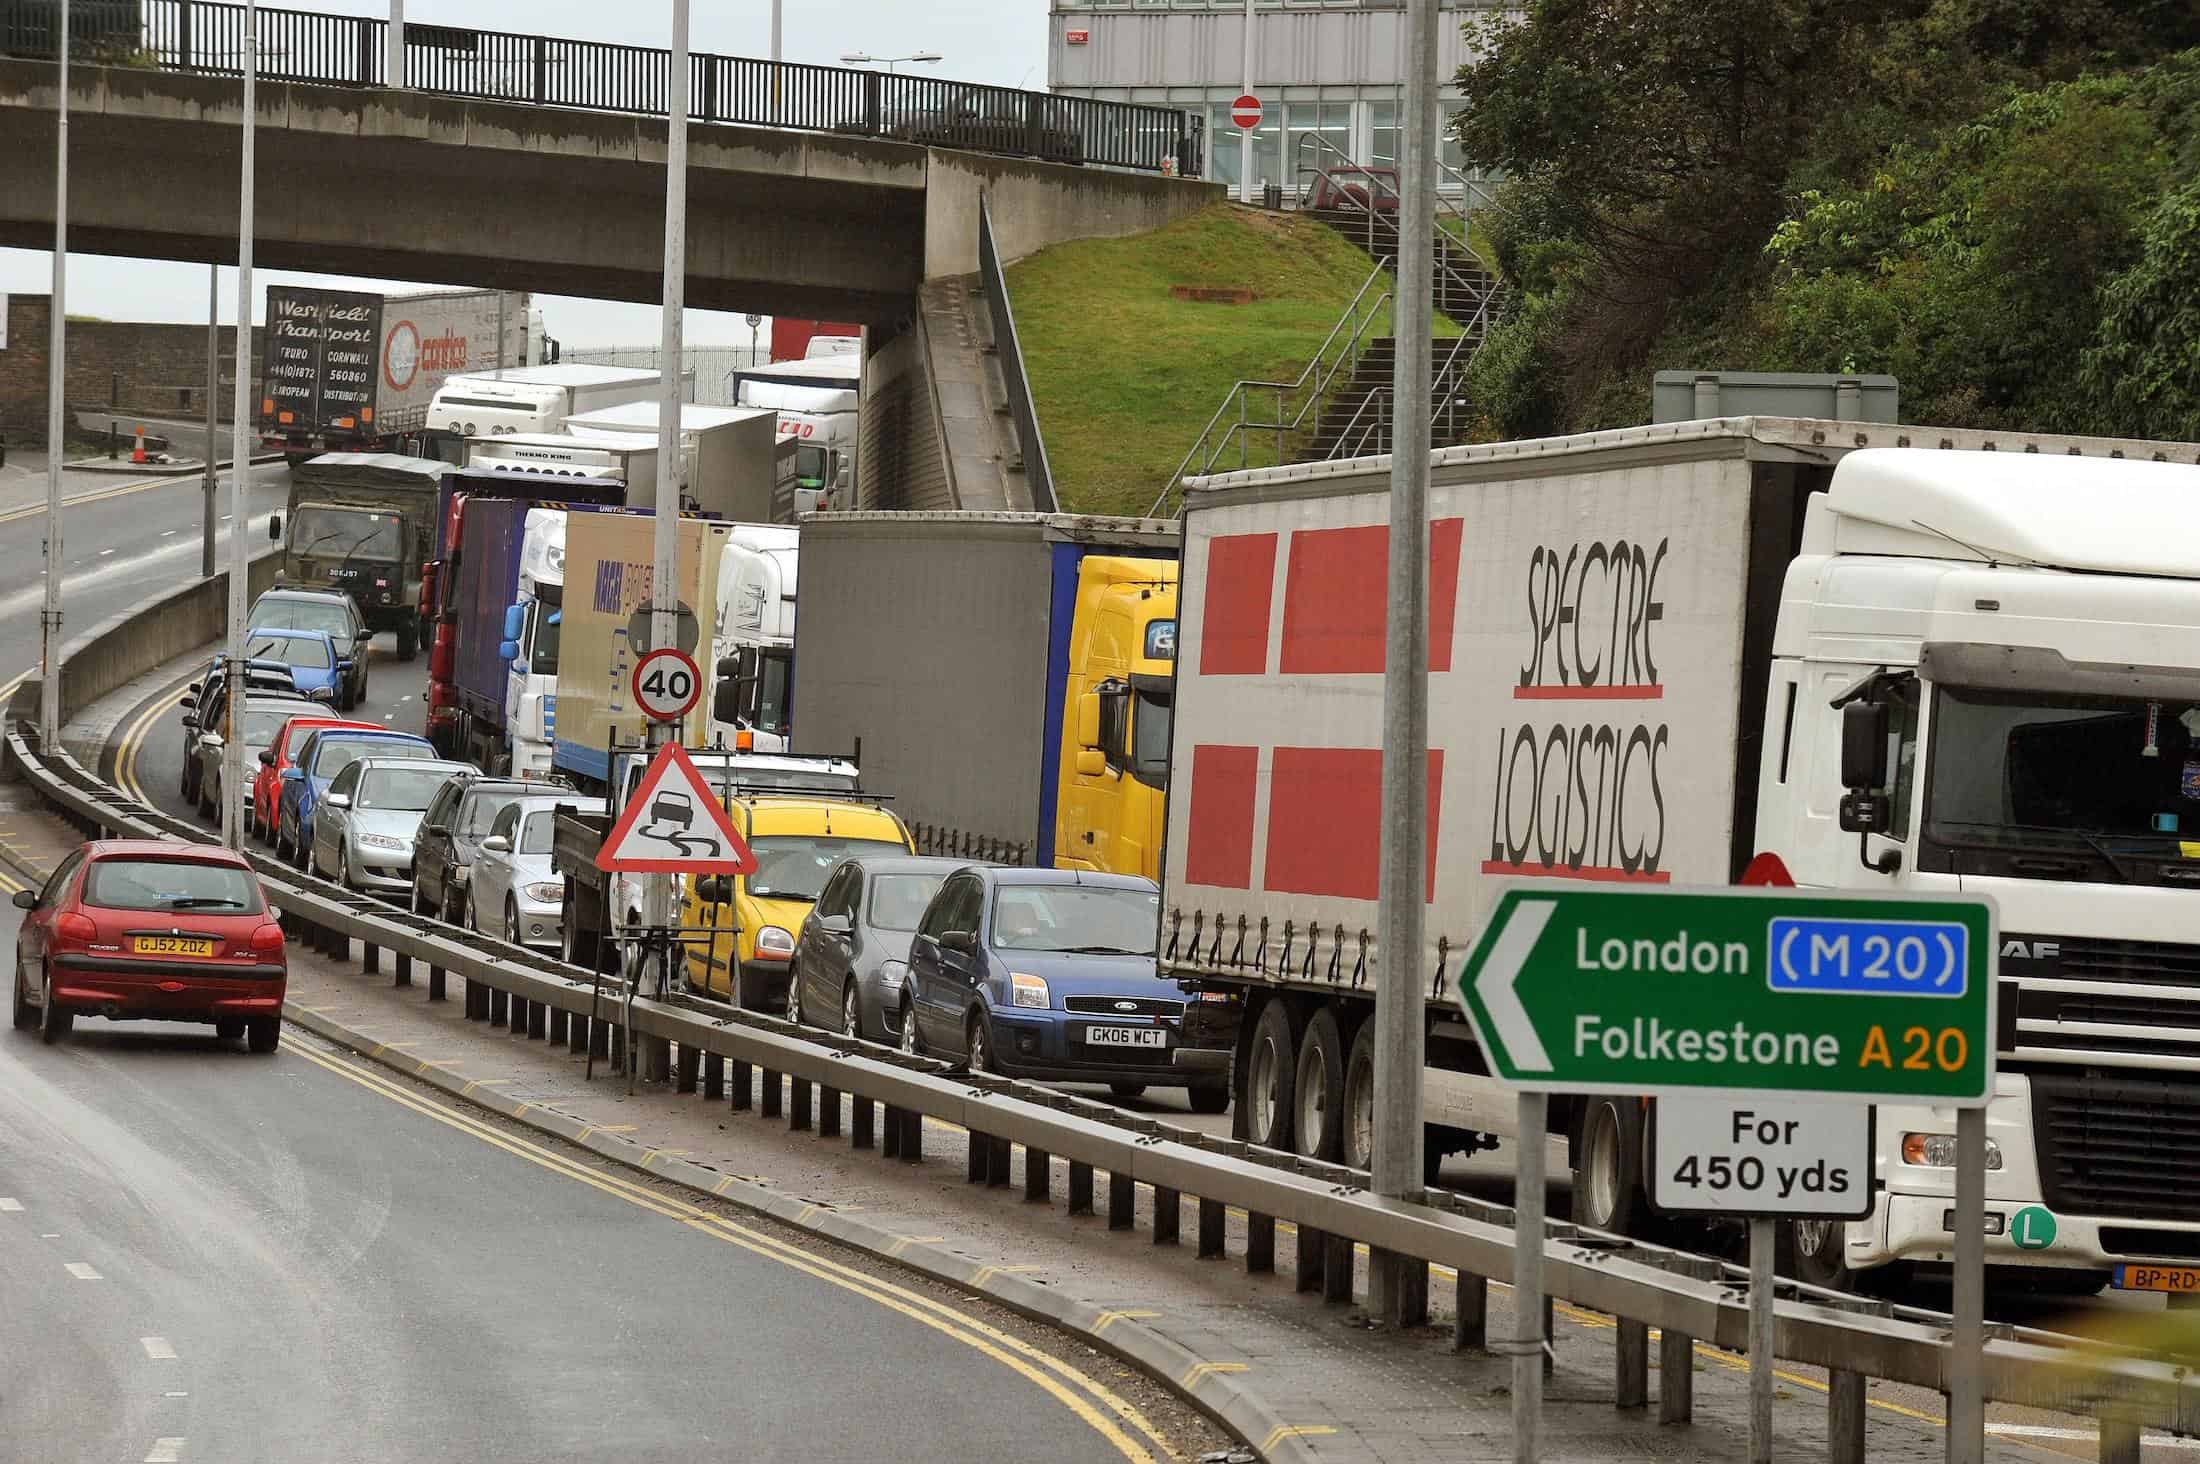 ‘Offensive’ as Highways England undergo £7m rebrand only 5 years after last one